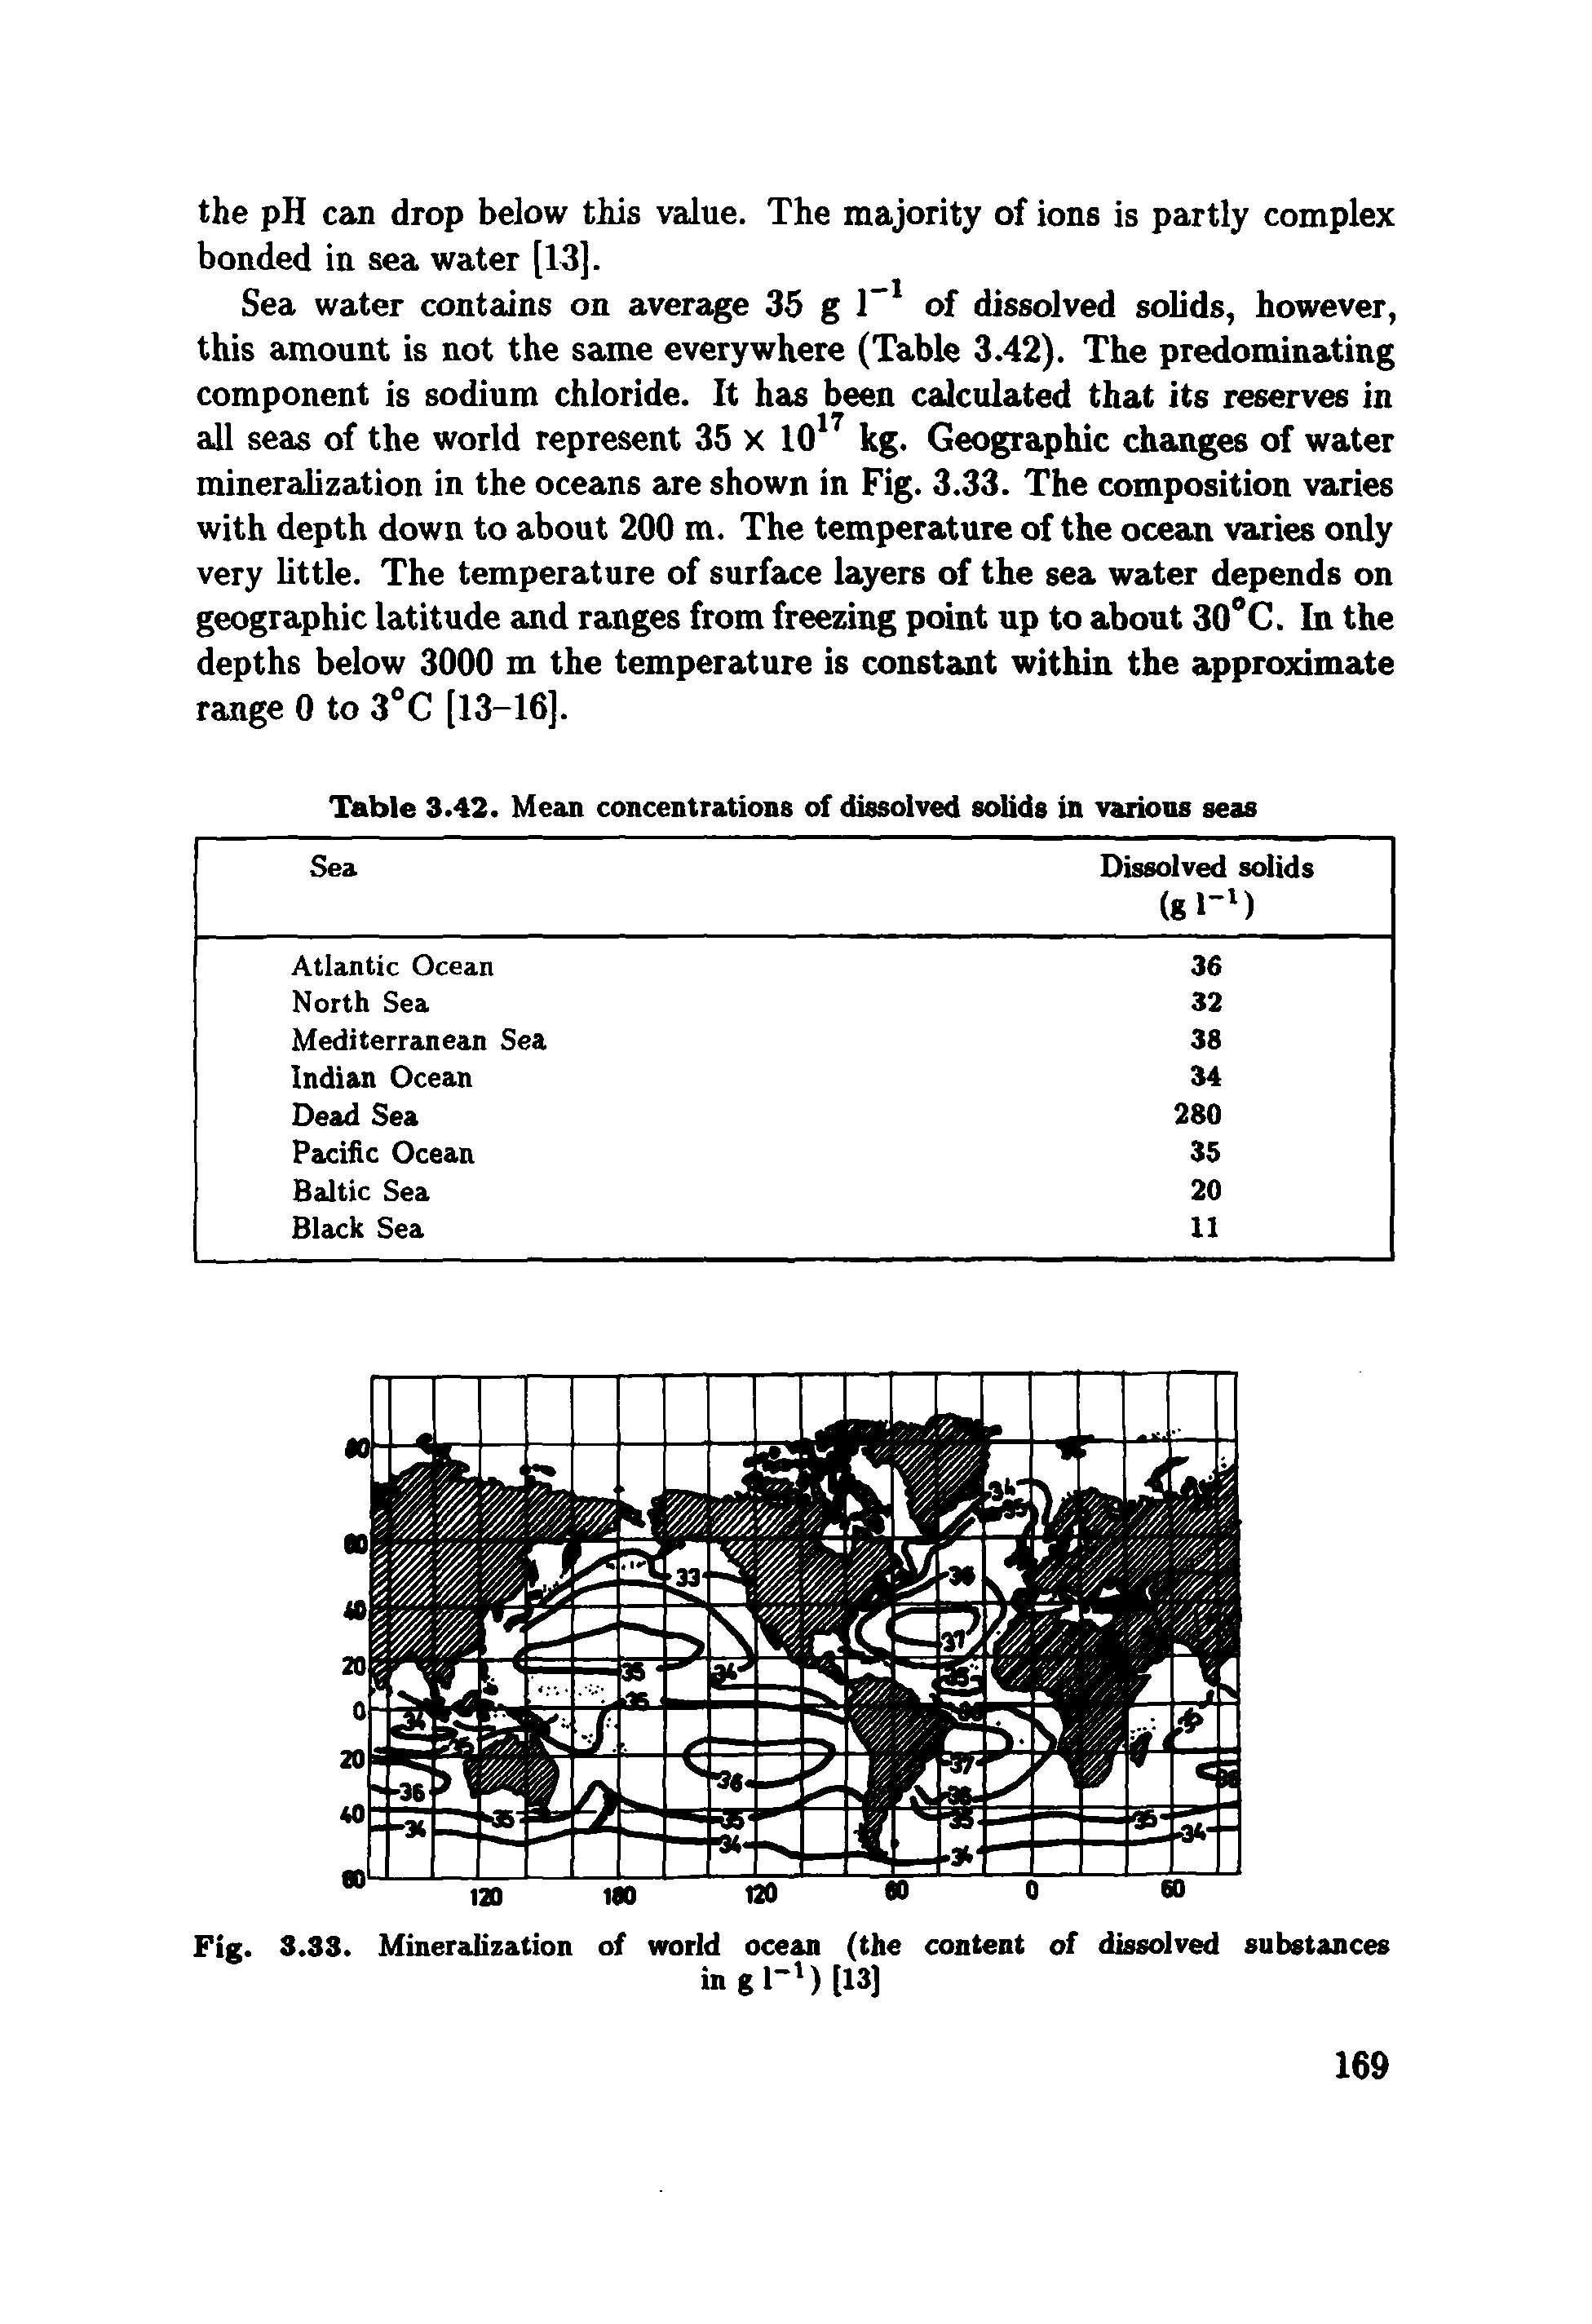 Fig. 3.33. Mineralization of world ocean (the content of dissolved substances...